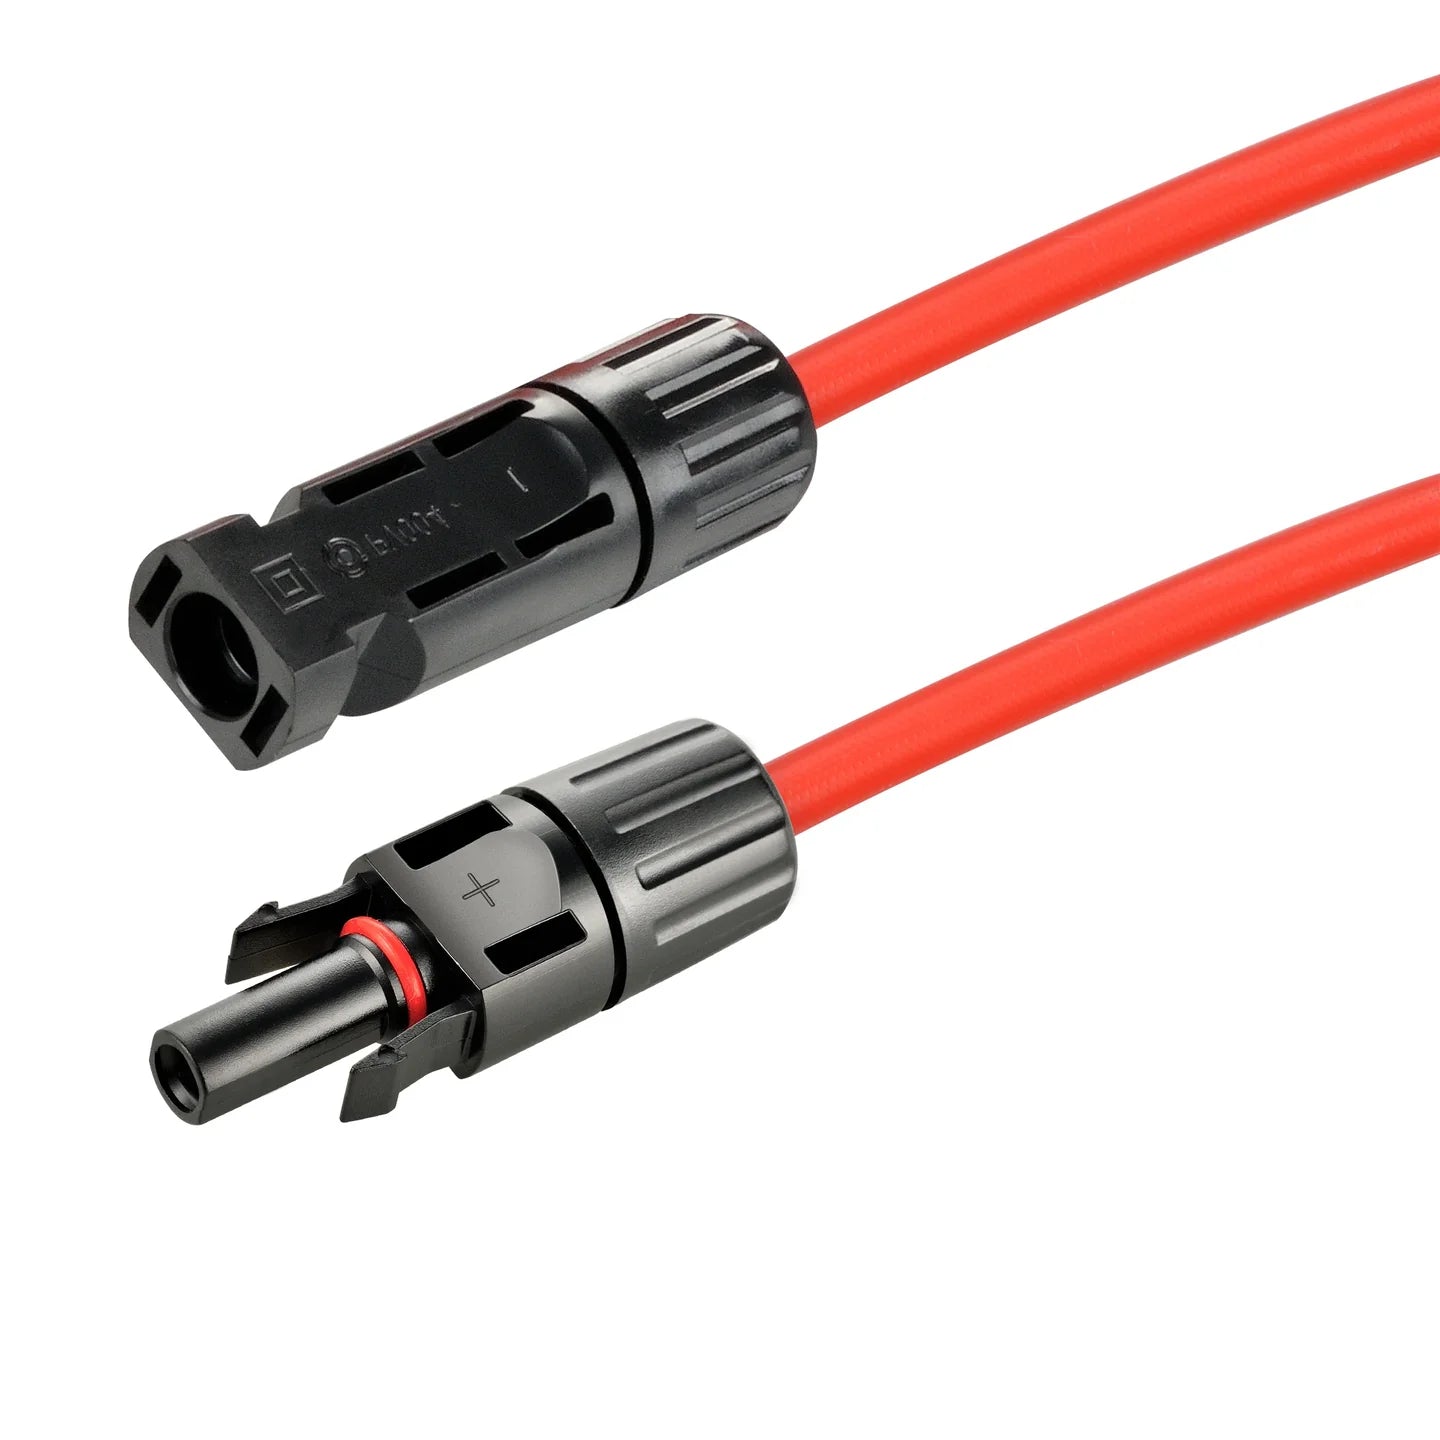 RICH SOLAR 10 Gauge (10AWG) Solar Panel Extension Cable Wire with Solar Connectors (Red & Black Set)